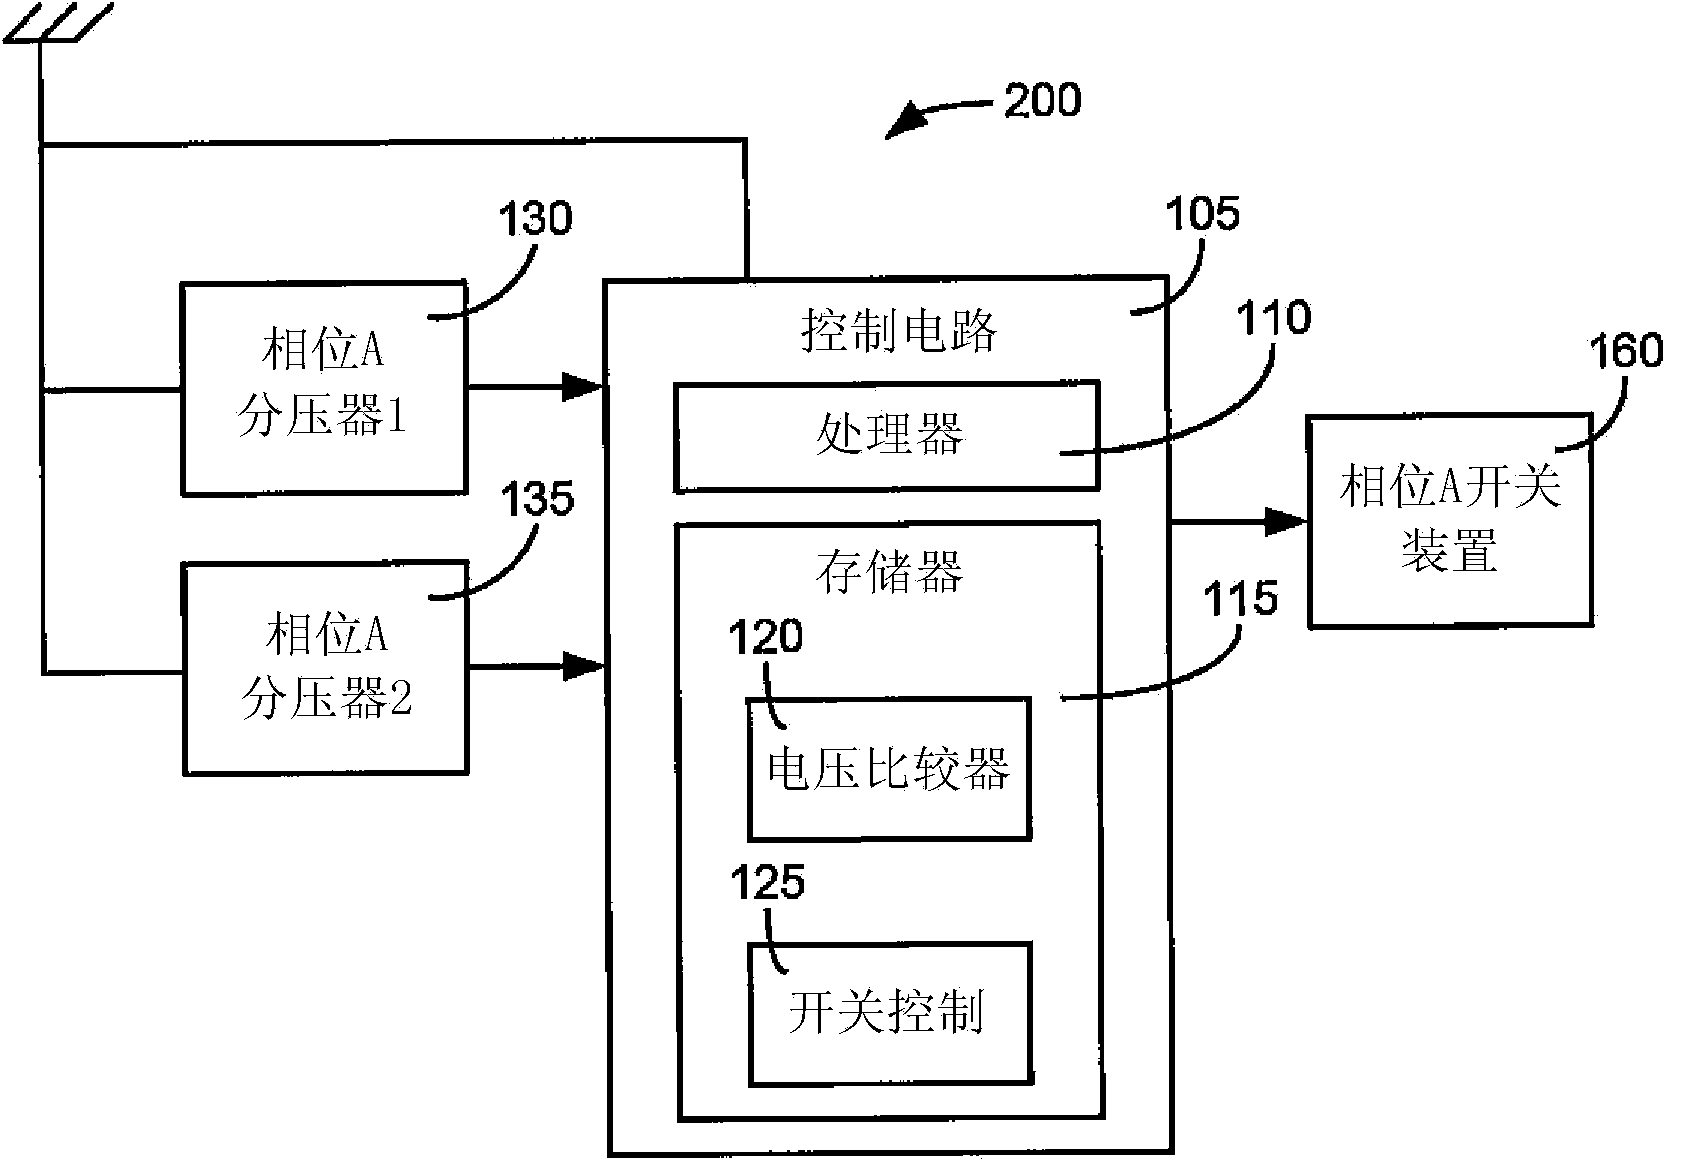 Control system for synchronous capacitor switch